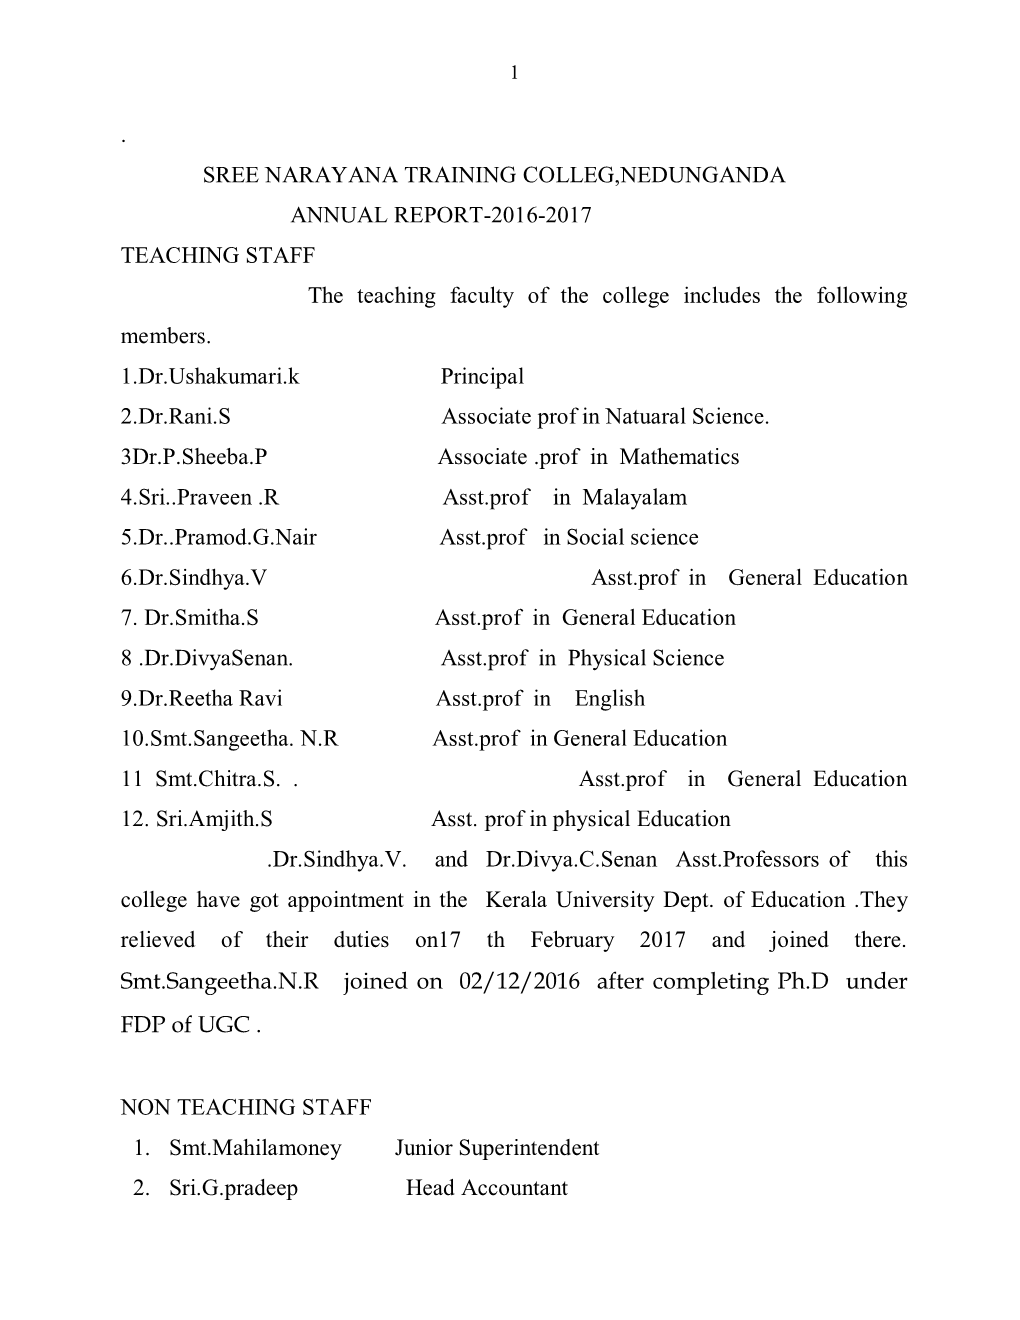 SREE NARAYANA TRAINING COLLEG,NEDUNGANDA ANNUAL REPORT-2016-2017 TEACHING STAFF the Teaching Faculty of the College Includes the Following Members